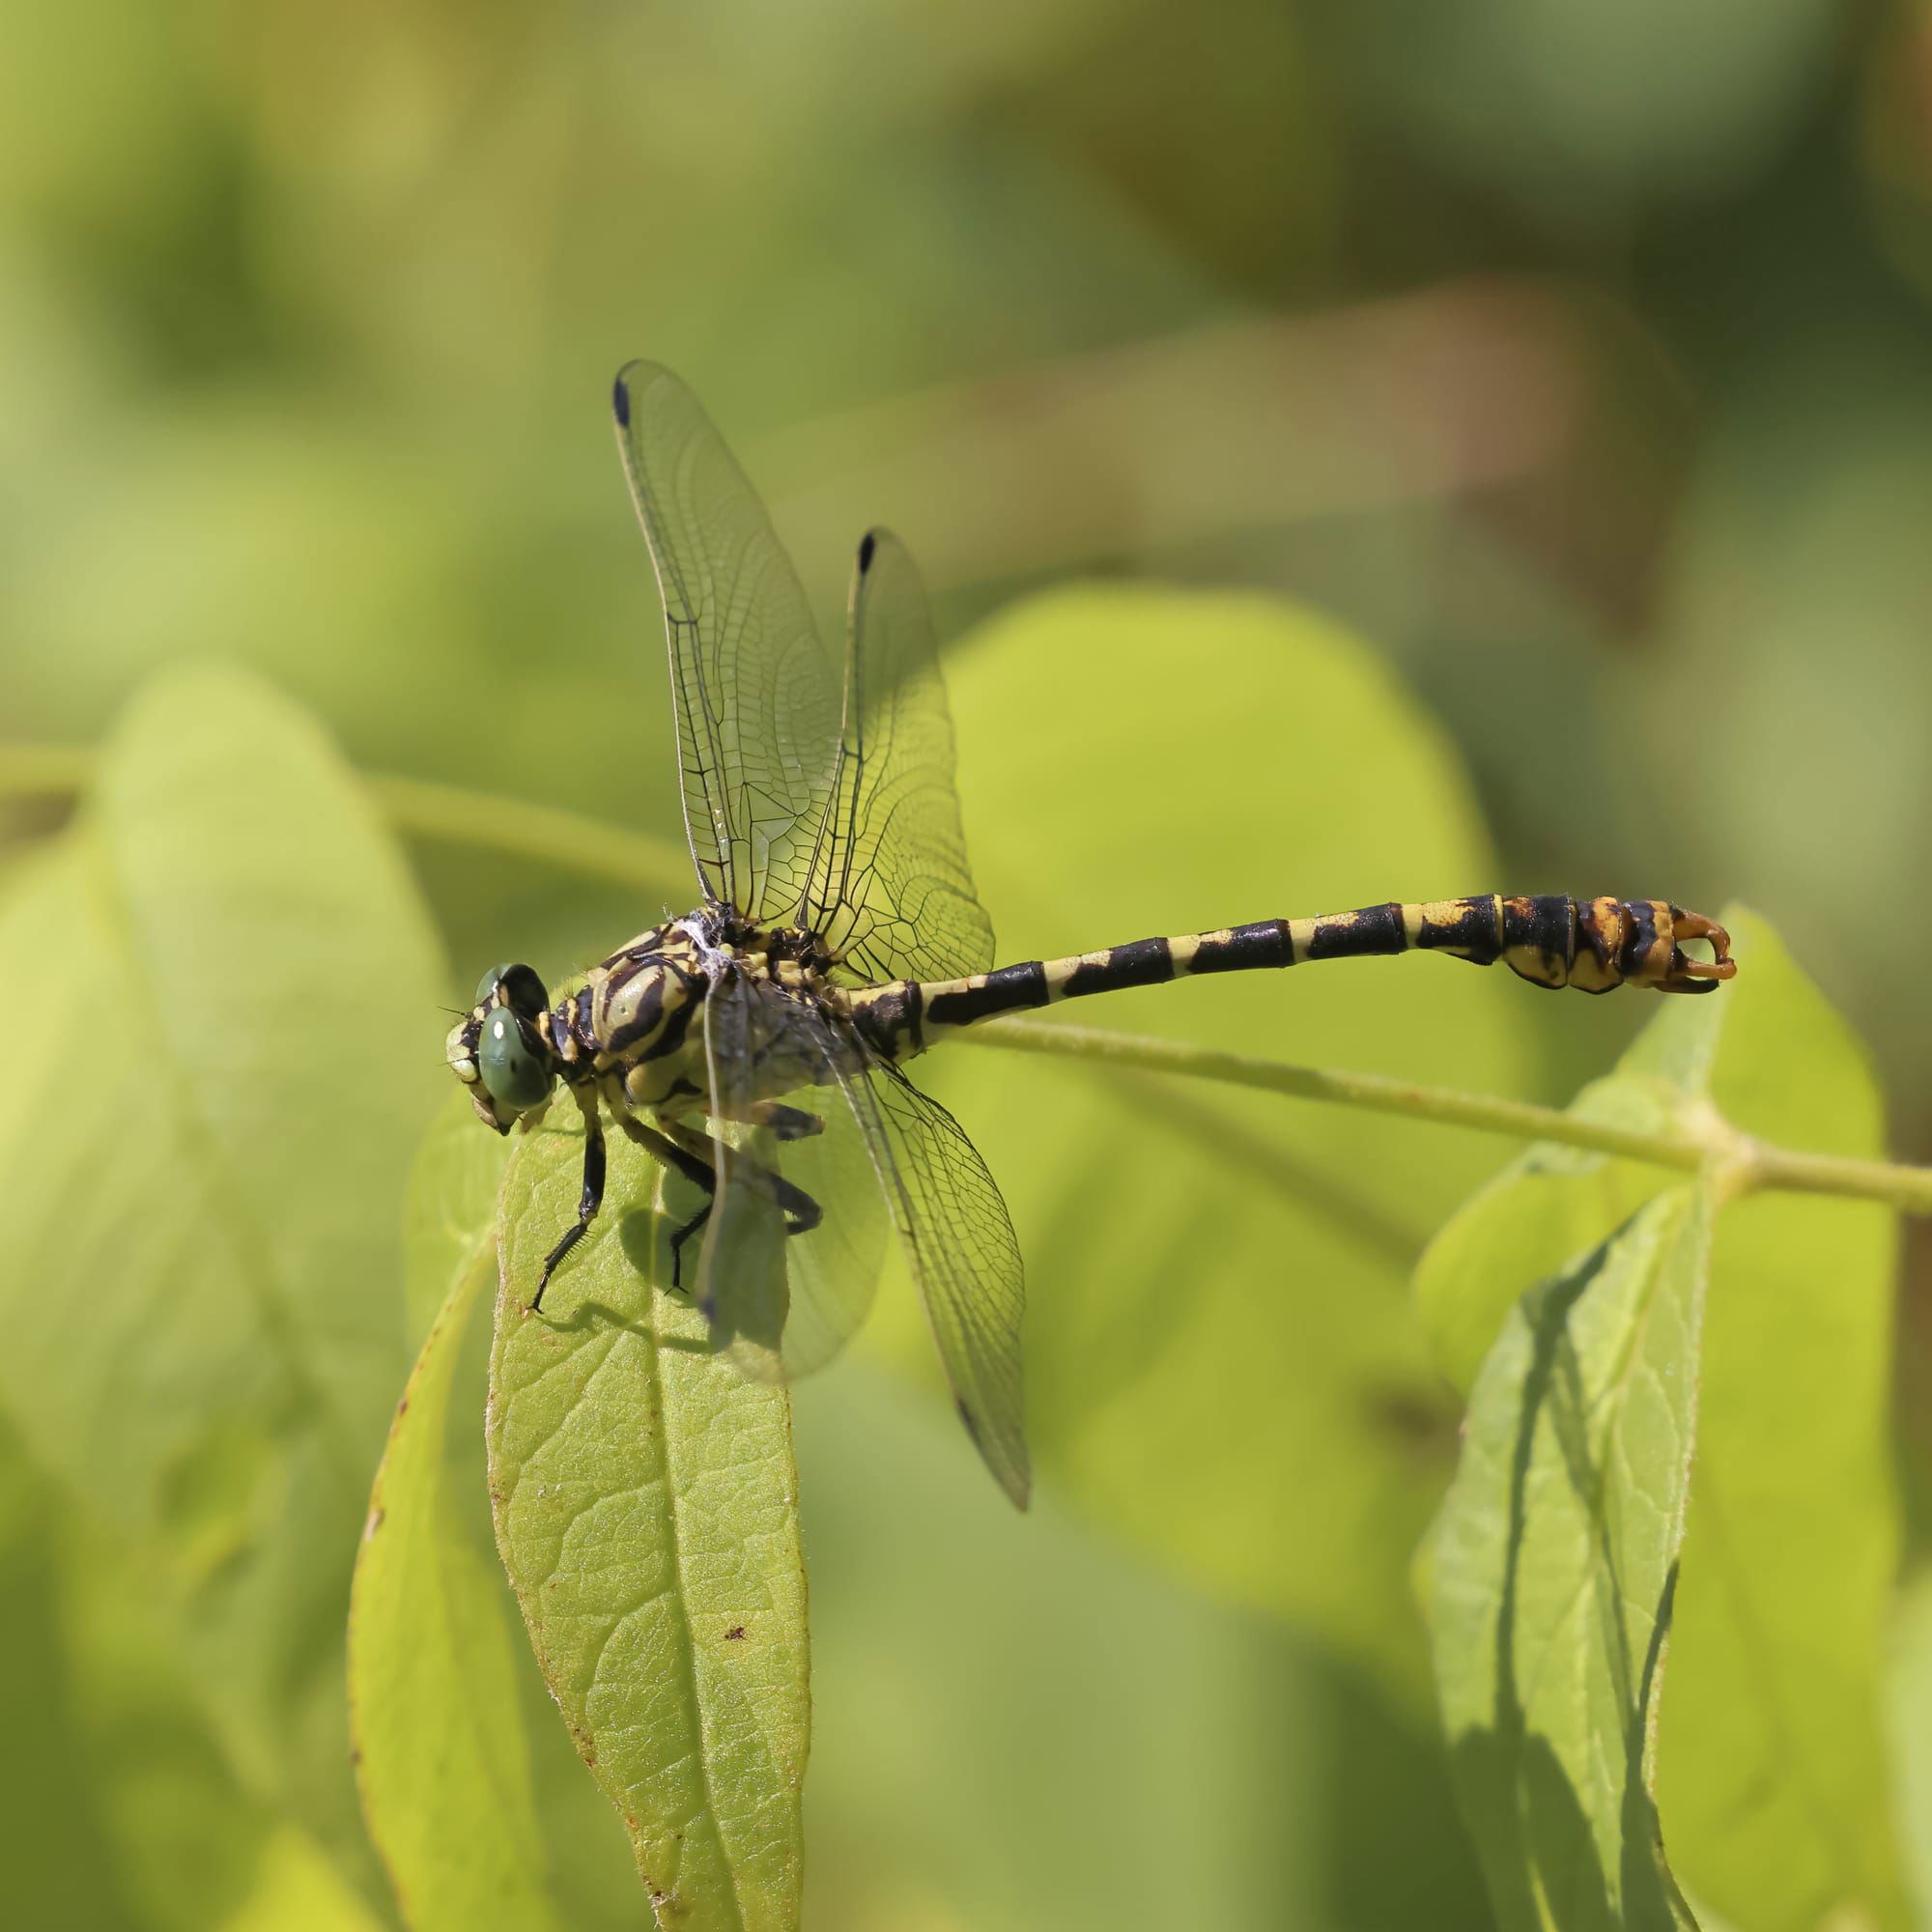 Small Pincertail